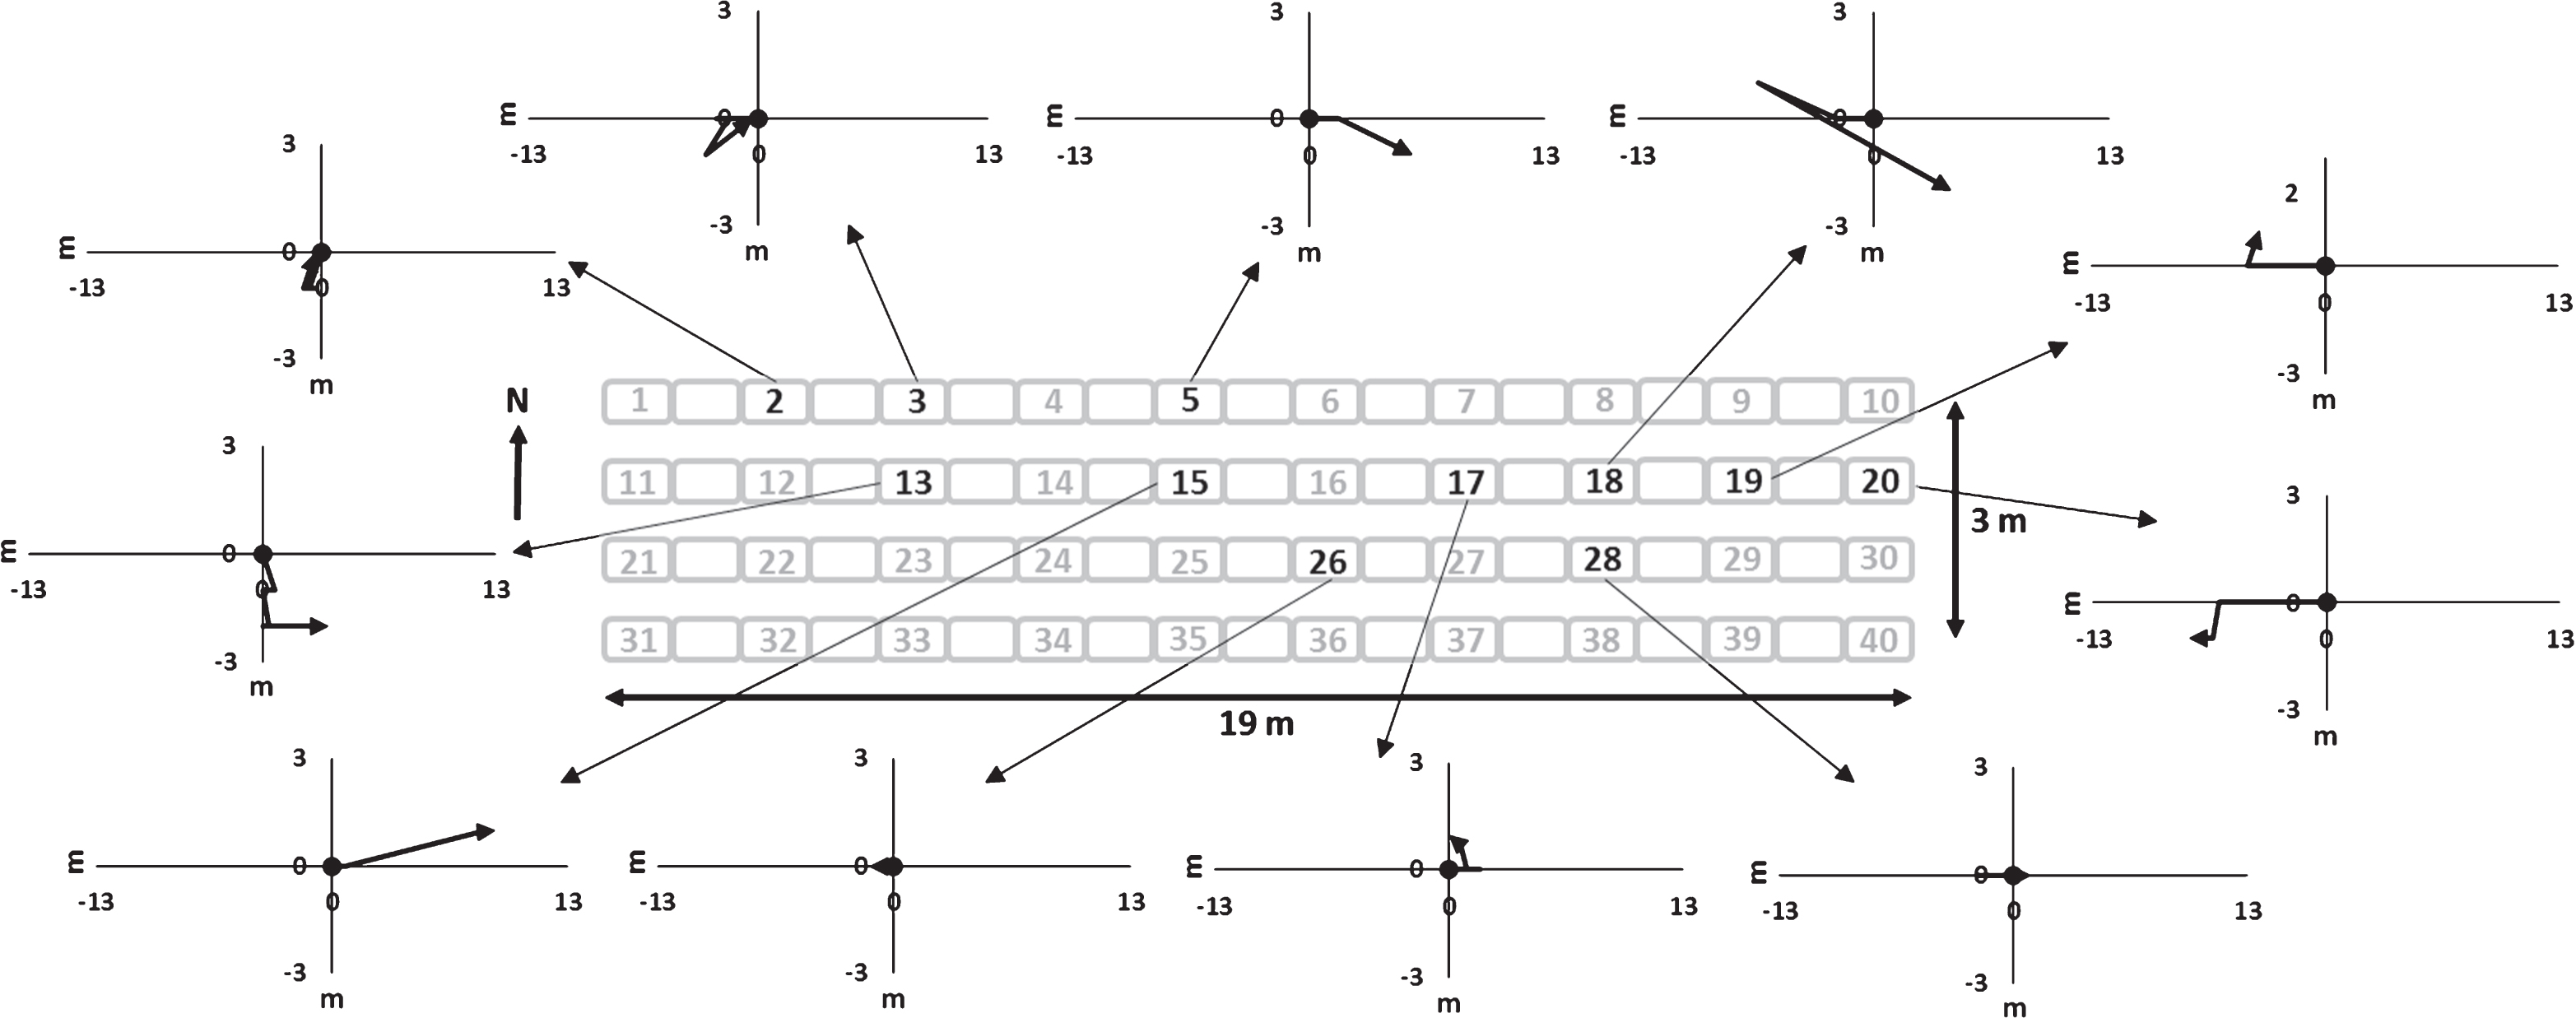 Plots illustrating movement of 11 RFID tagged vine weevils on four rows each of 19 strawberry grow-bags. Each weevil was recorded as healthy and still tagged after 35 days. Black numbers indicate the approximate start positions of each of the 11 weevils within the crop area and grey numbers indicate the approximate start positions of RFID tagged weevils, which had either died, the tag had become detached or the weevil and/or tag had left the crop area during the experimental period. The arrow in each plot indicates the direction and distance (m) travelled by each weevil relative to the start position.